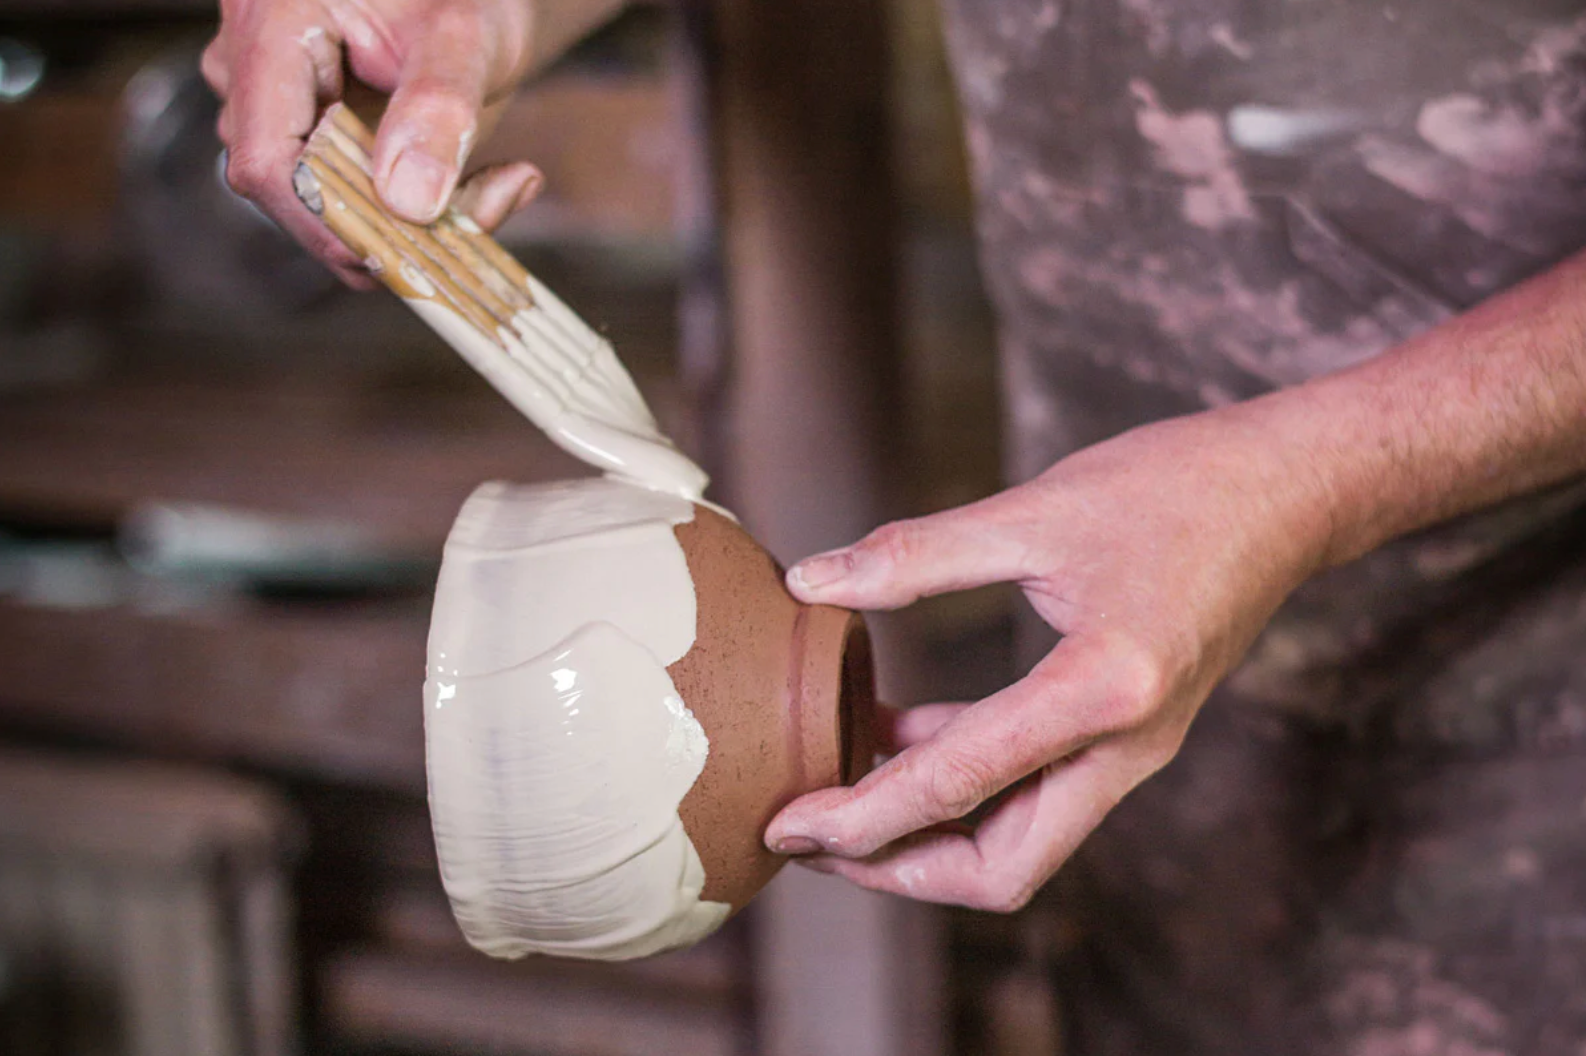 Phil applies glaze to a chawan with a handmade brush